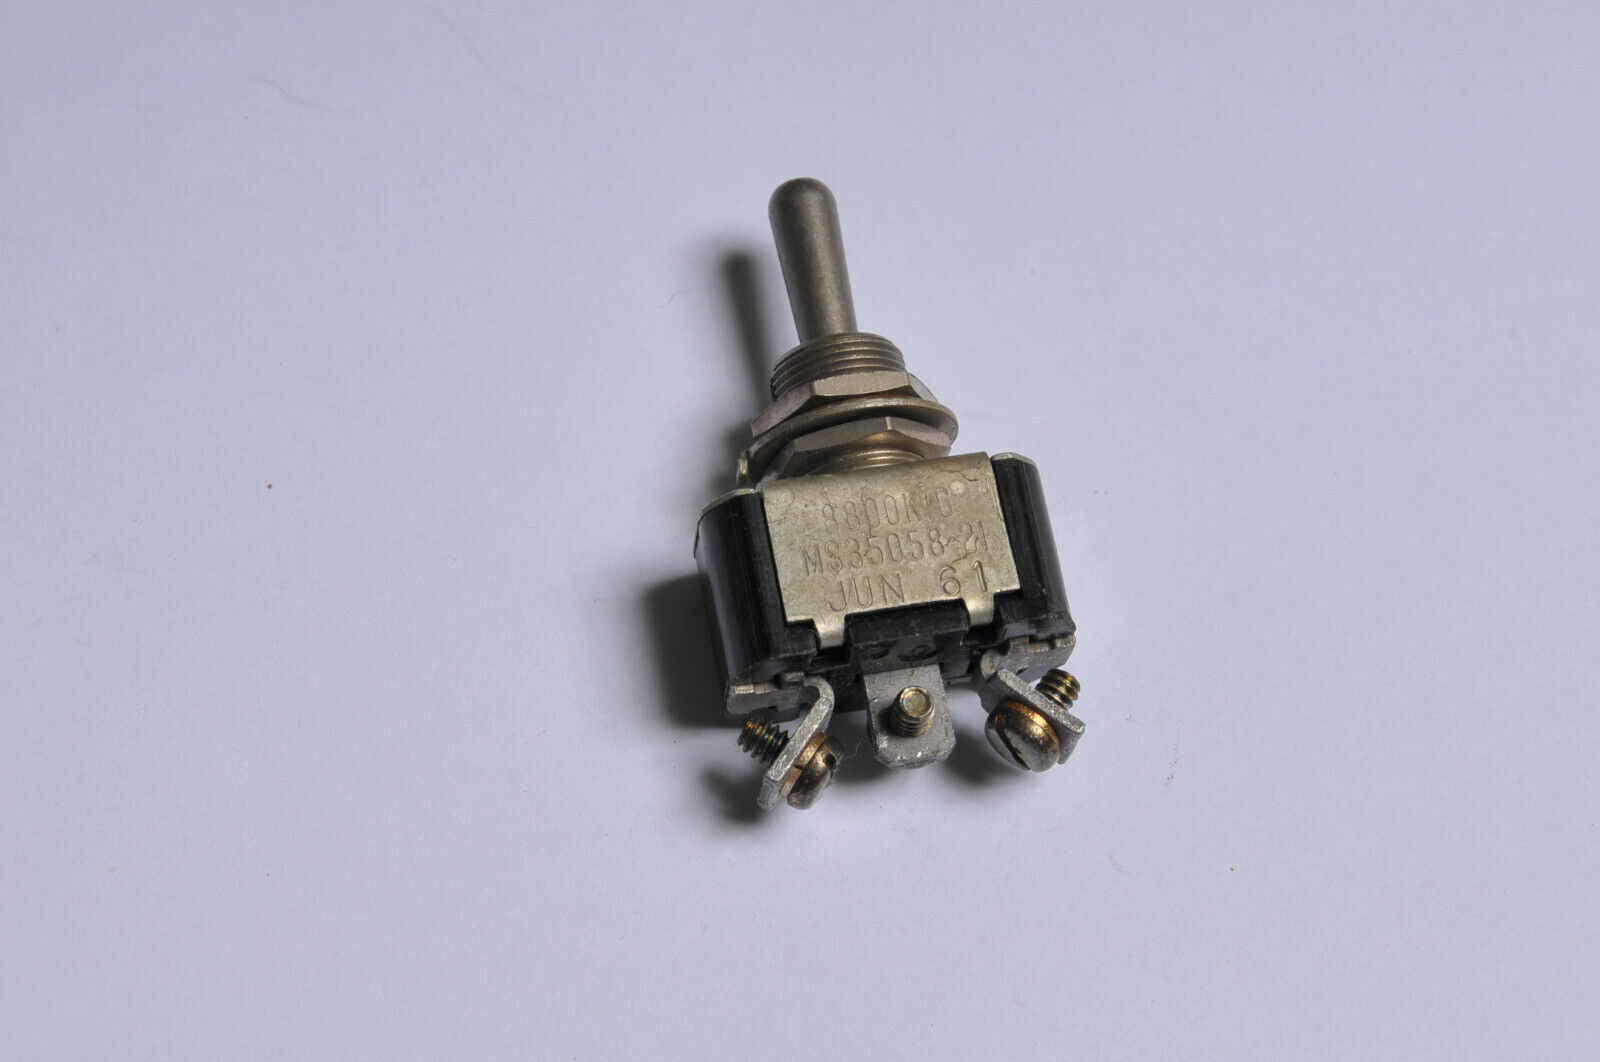 Aircraft toggle switch MS35058-21 / AN3021-1 / ST40E used on: Beechcraft, Cessna